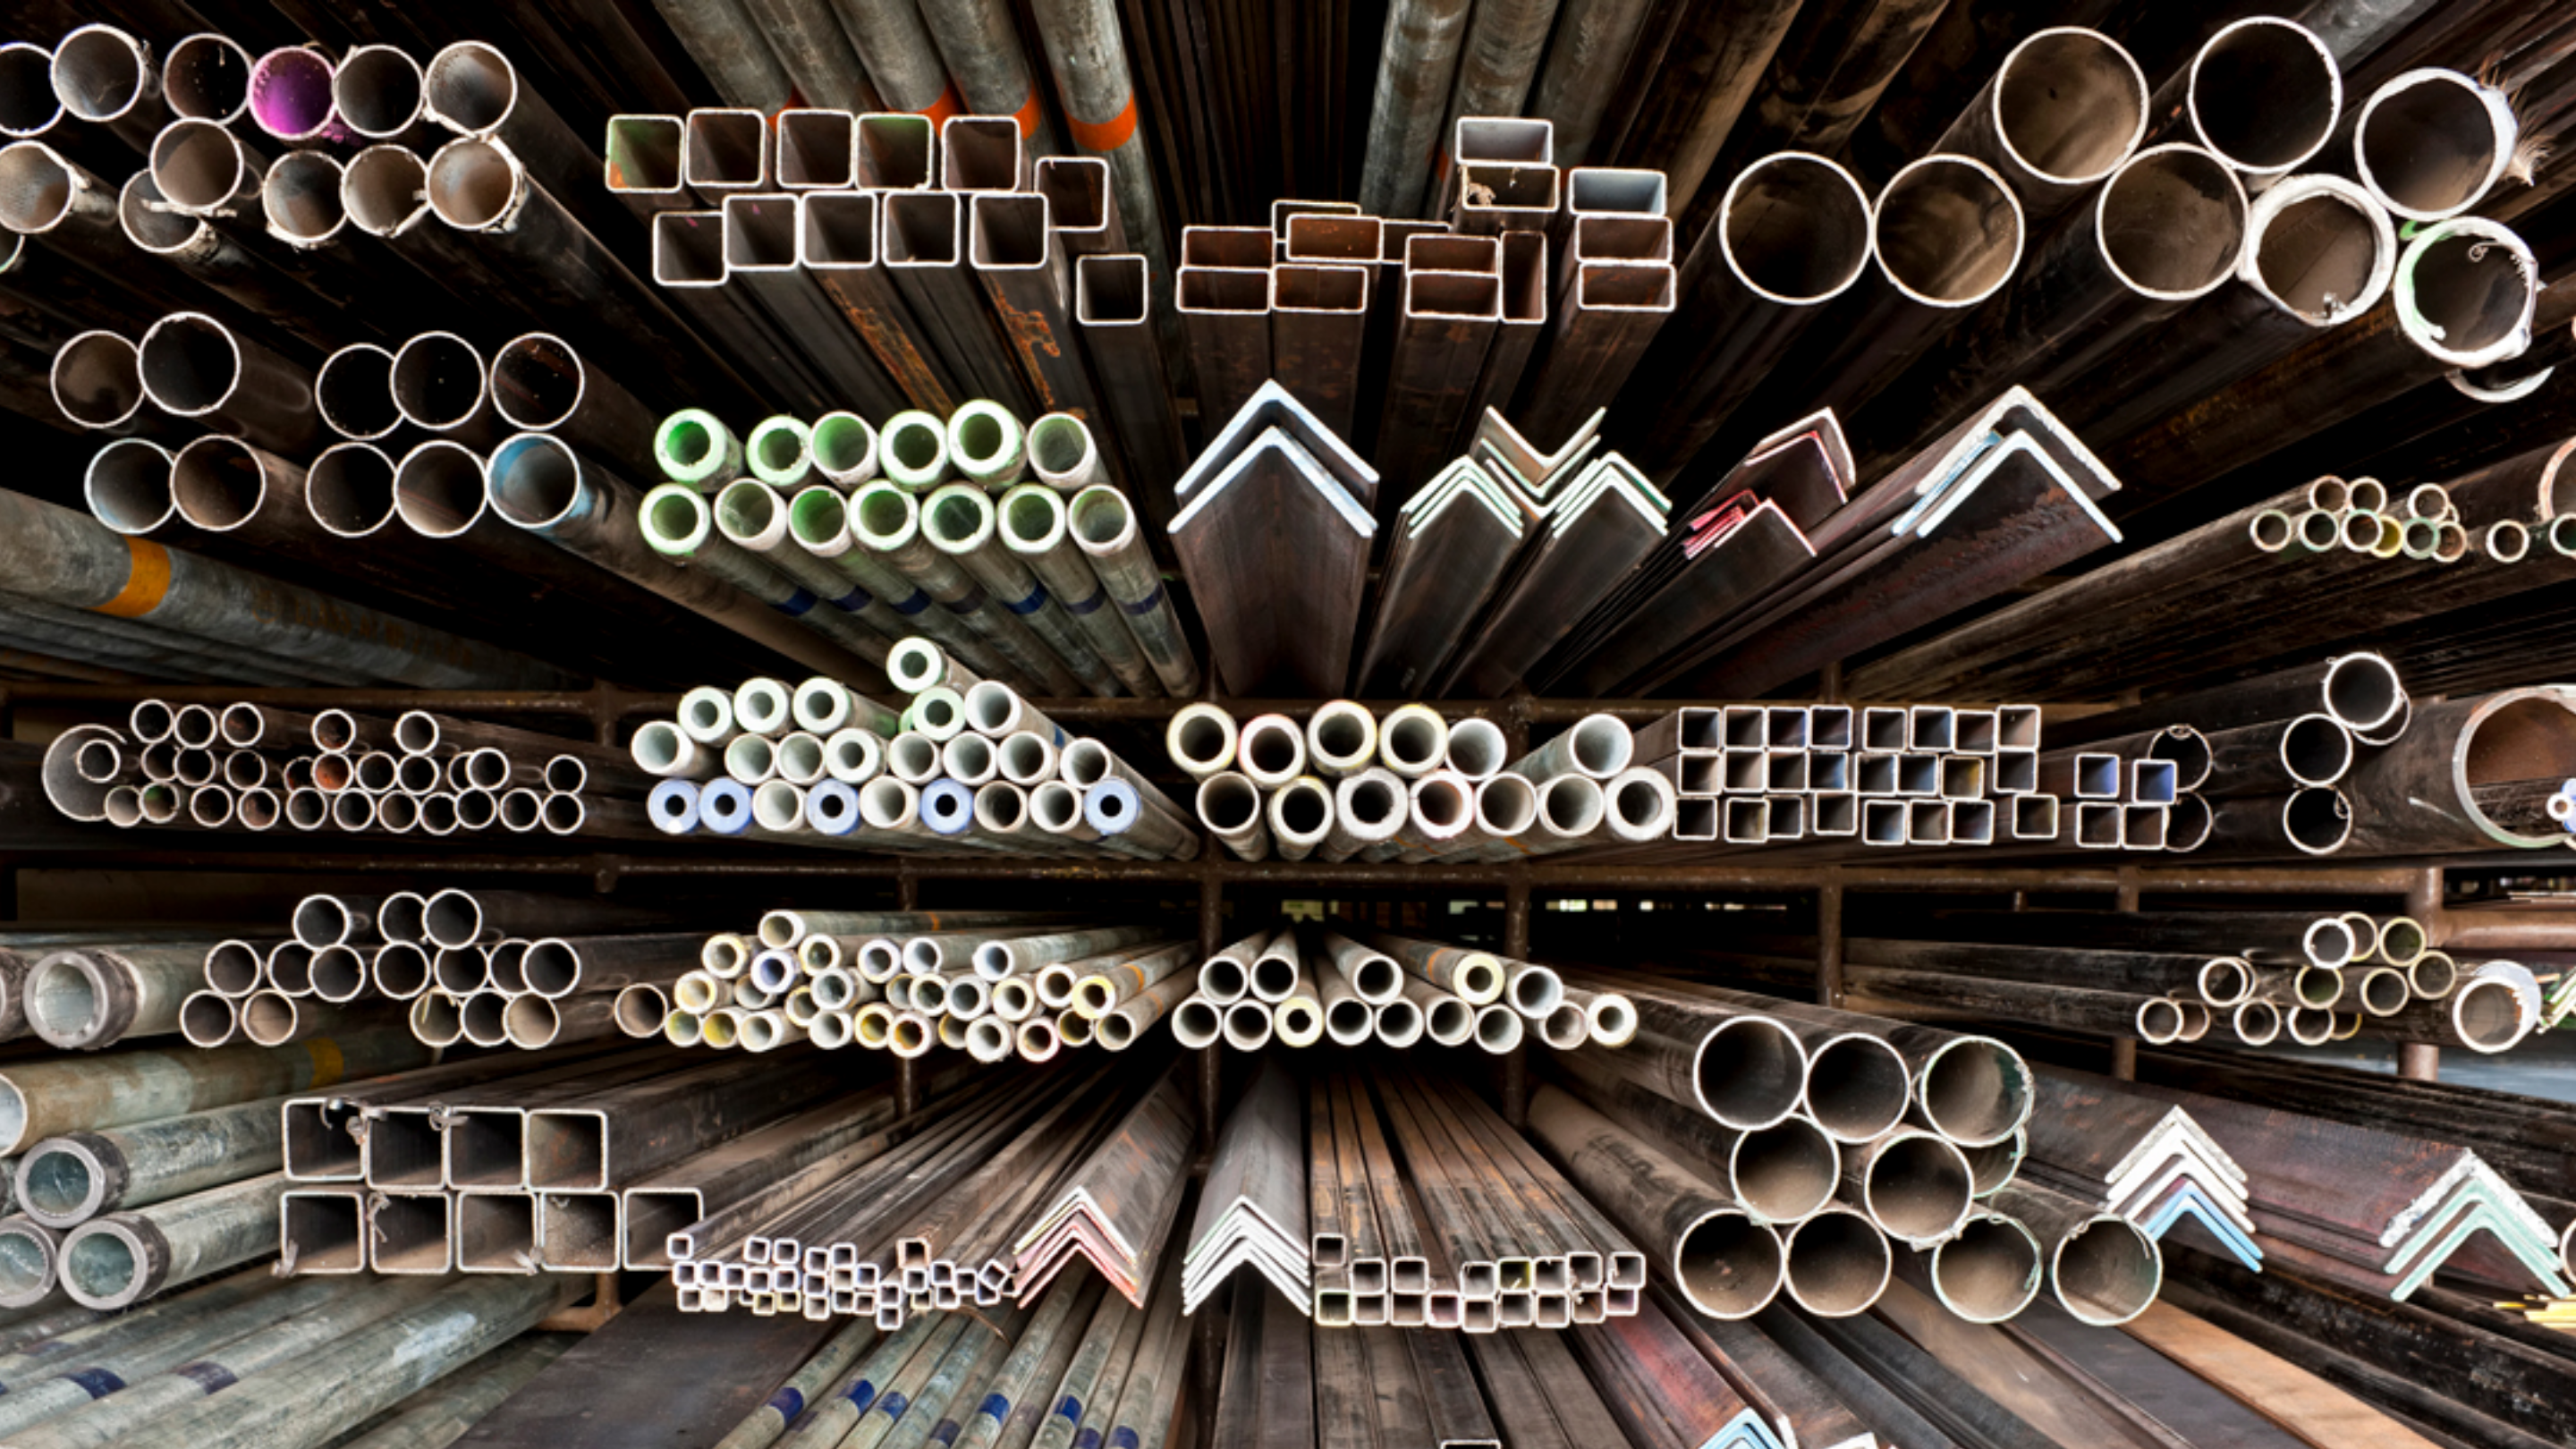 Now Available Online: Construction Steel Materials